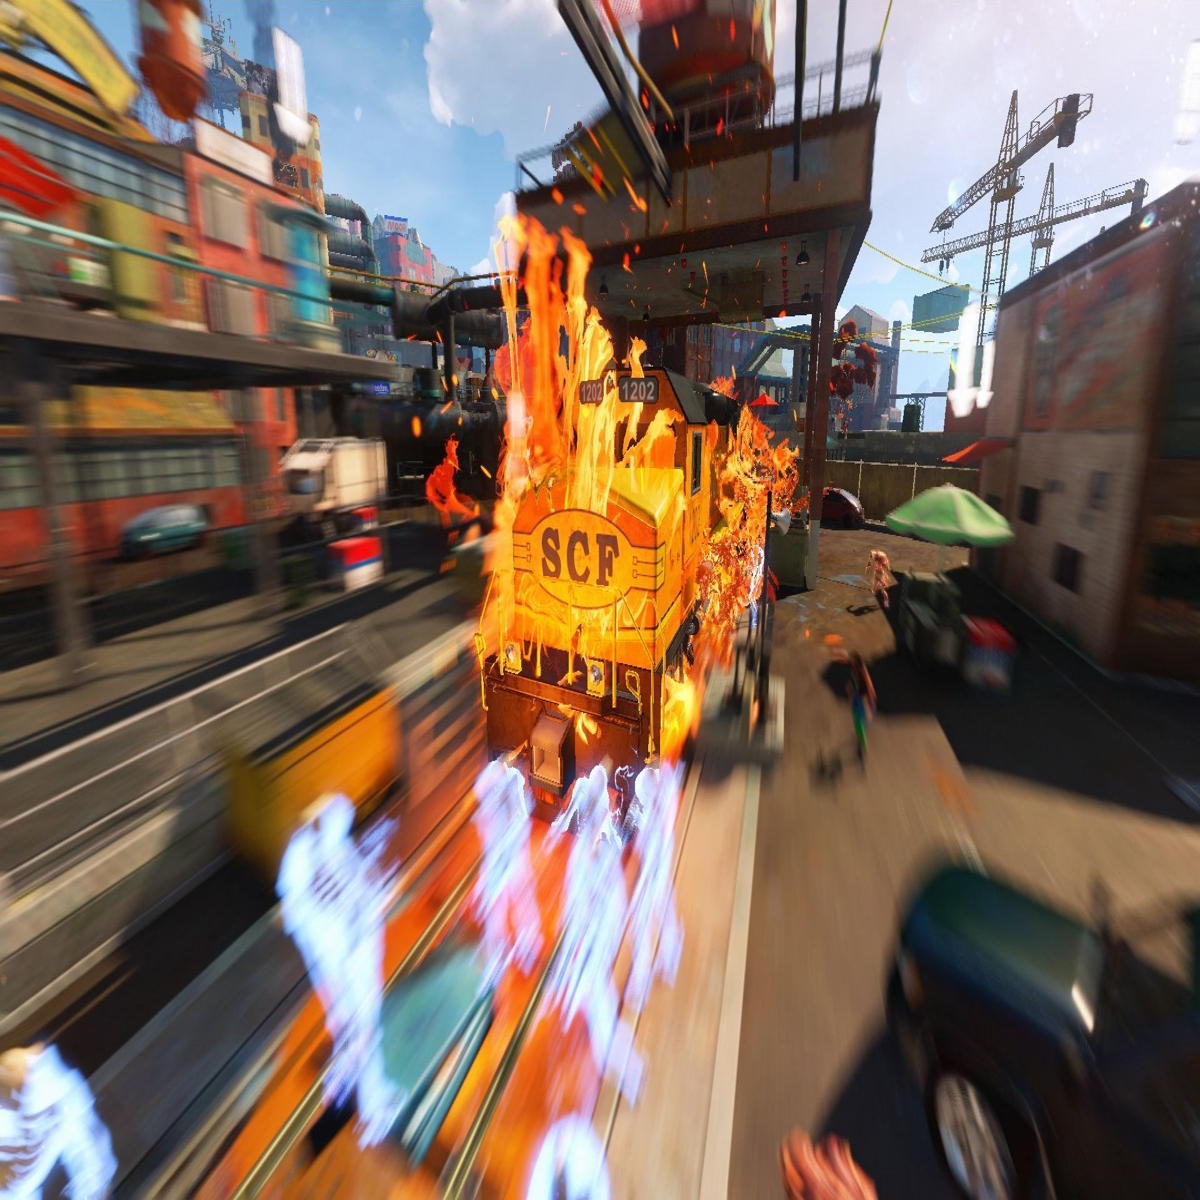 Sunset Overdrive is Appealing to the 90's Grudge Rocker in ALL of us